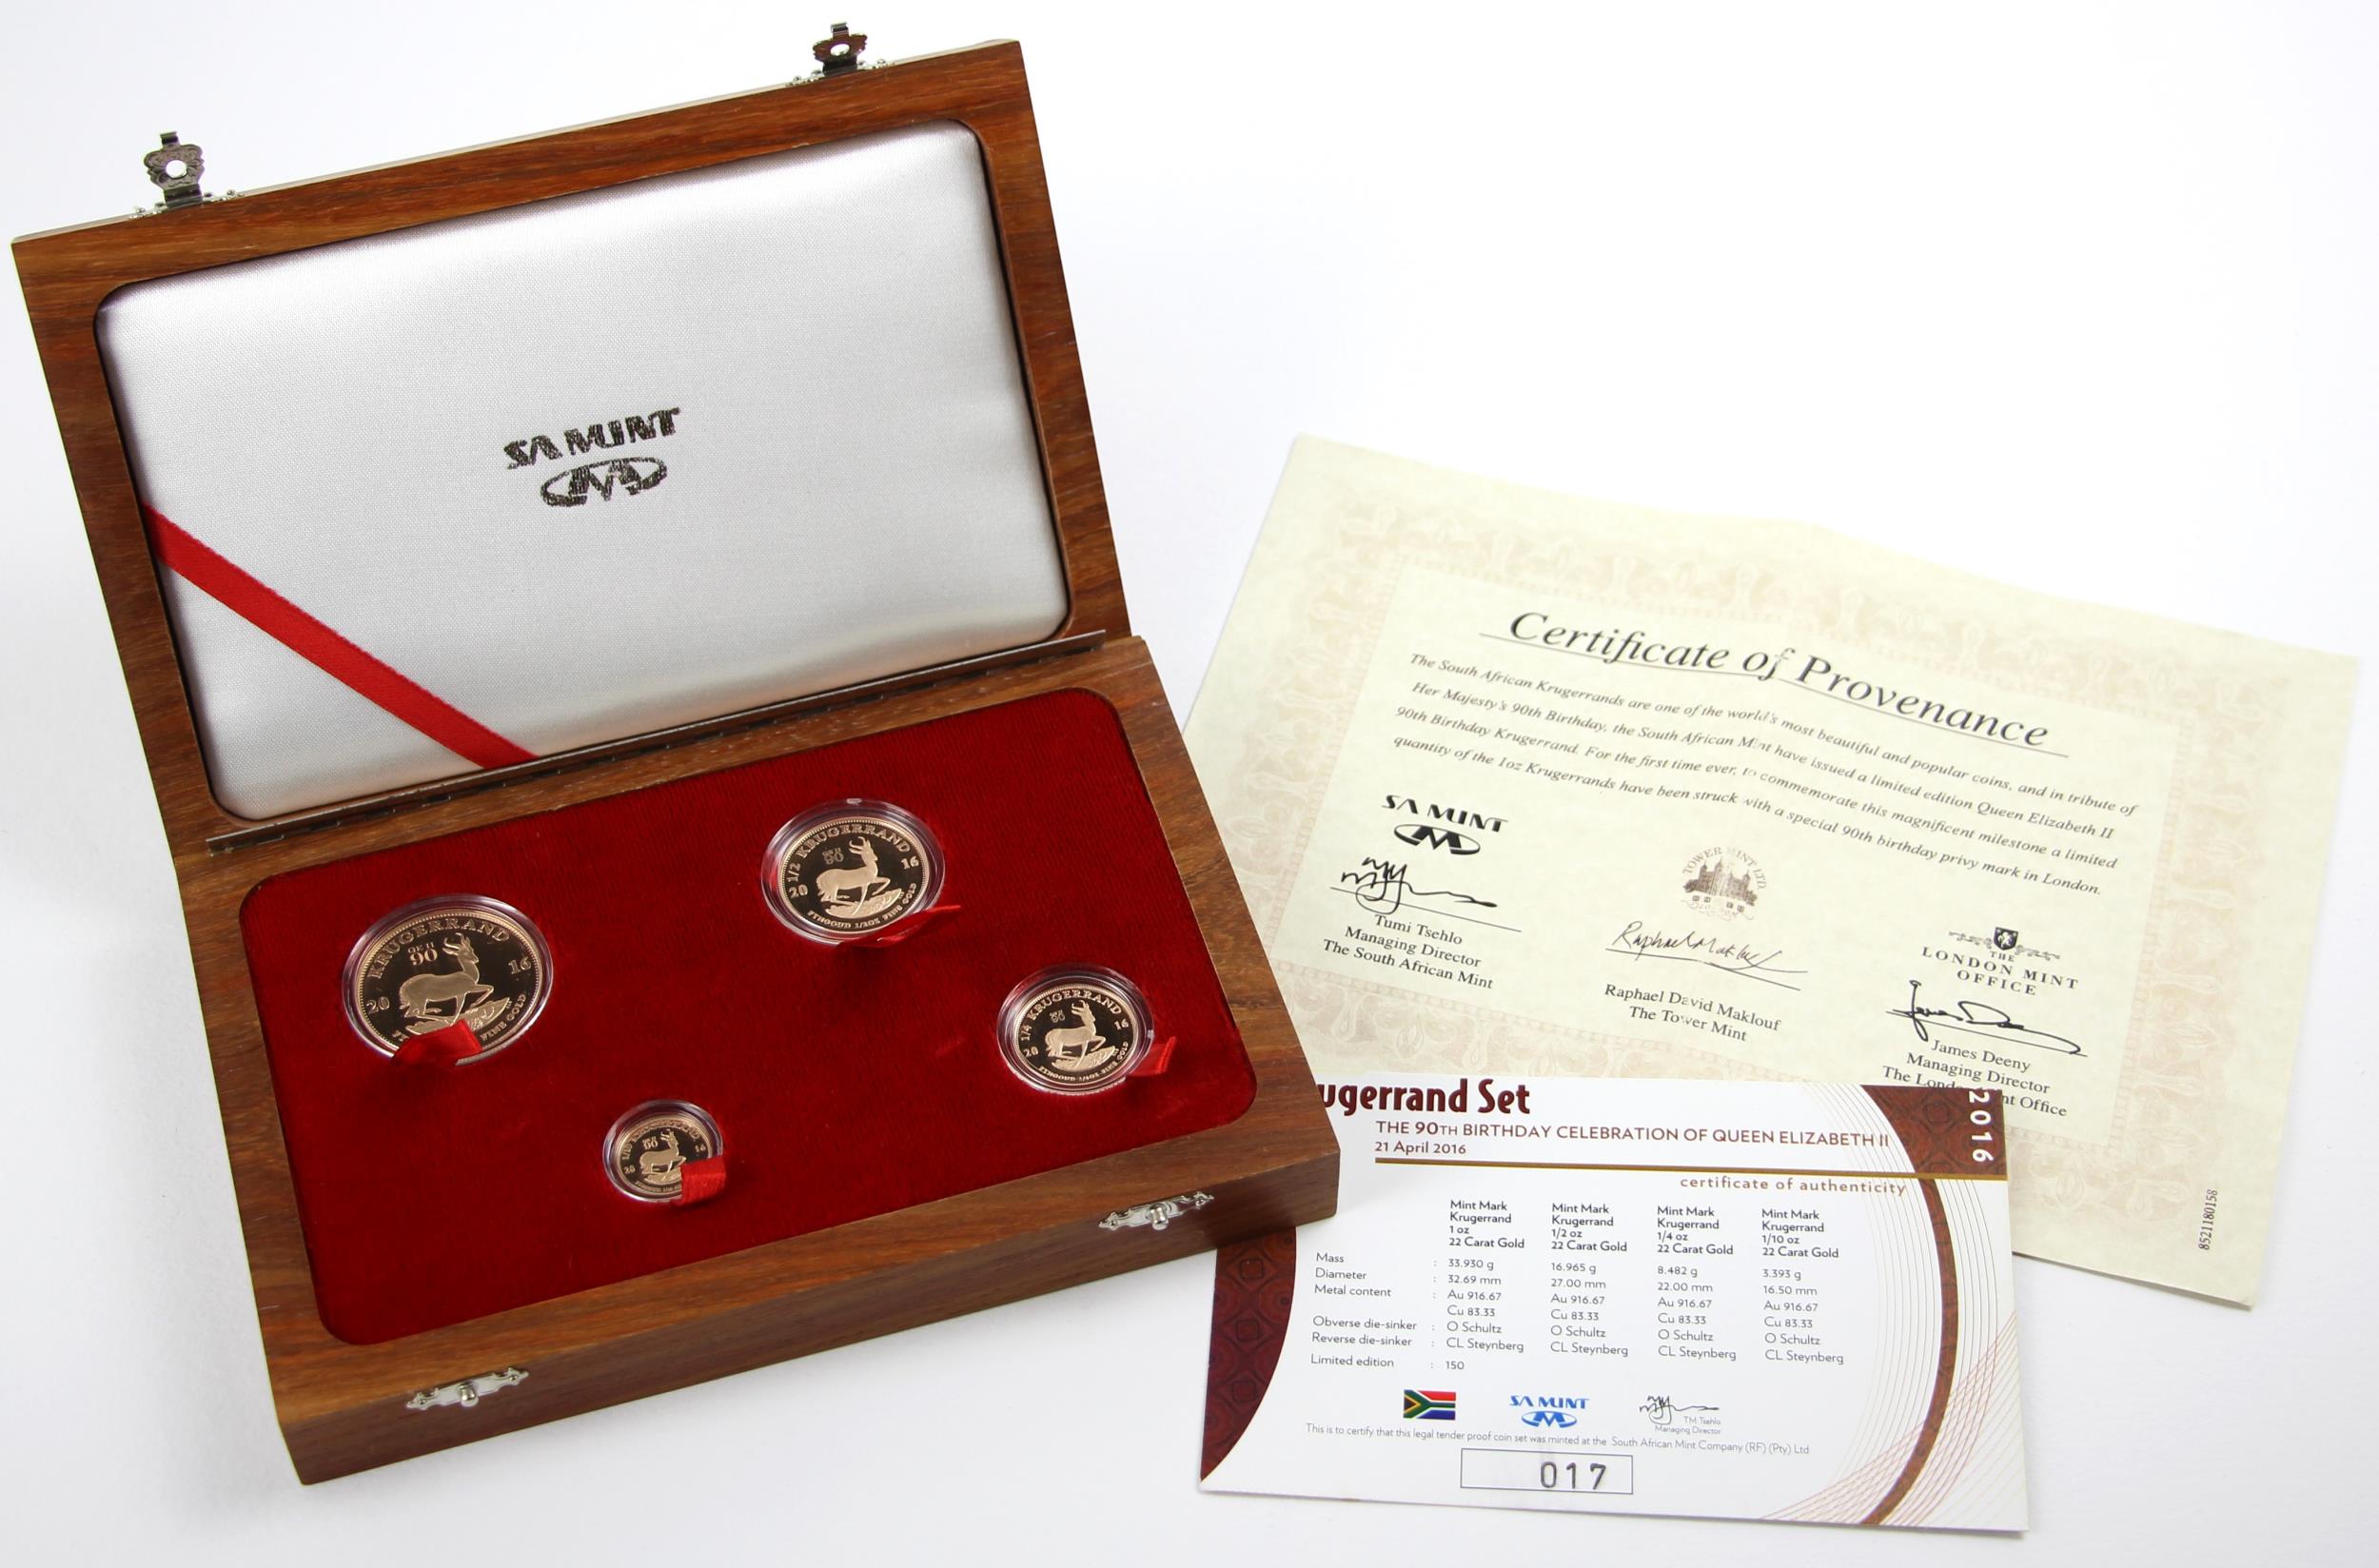 South Africa, Krugerrand collectors set, The 90th Birthday celebration of Queen Elizabeth II, - Image 3 of 3